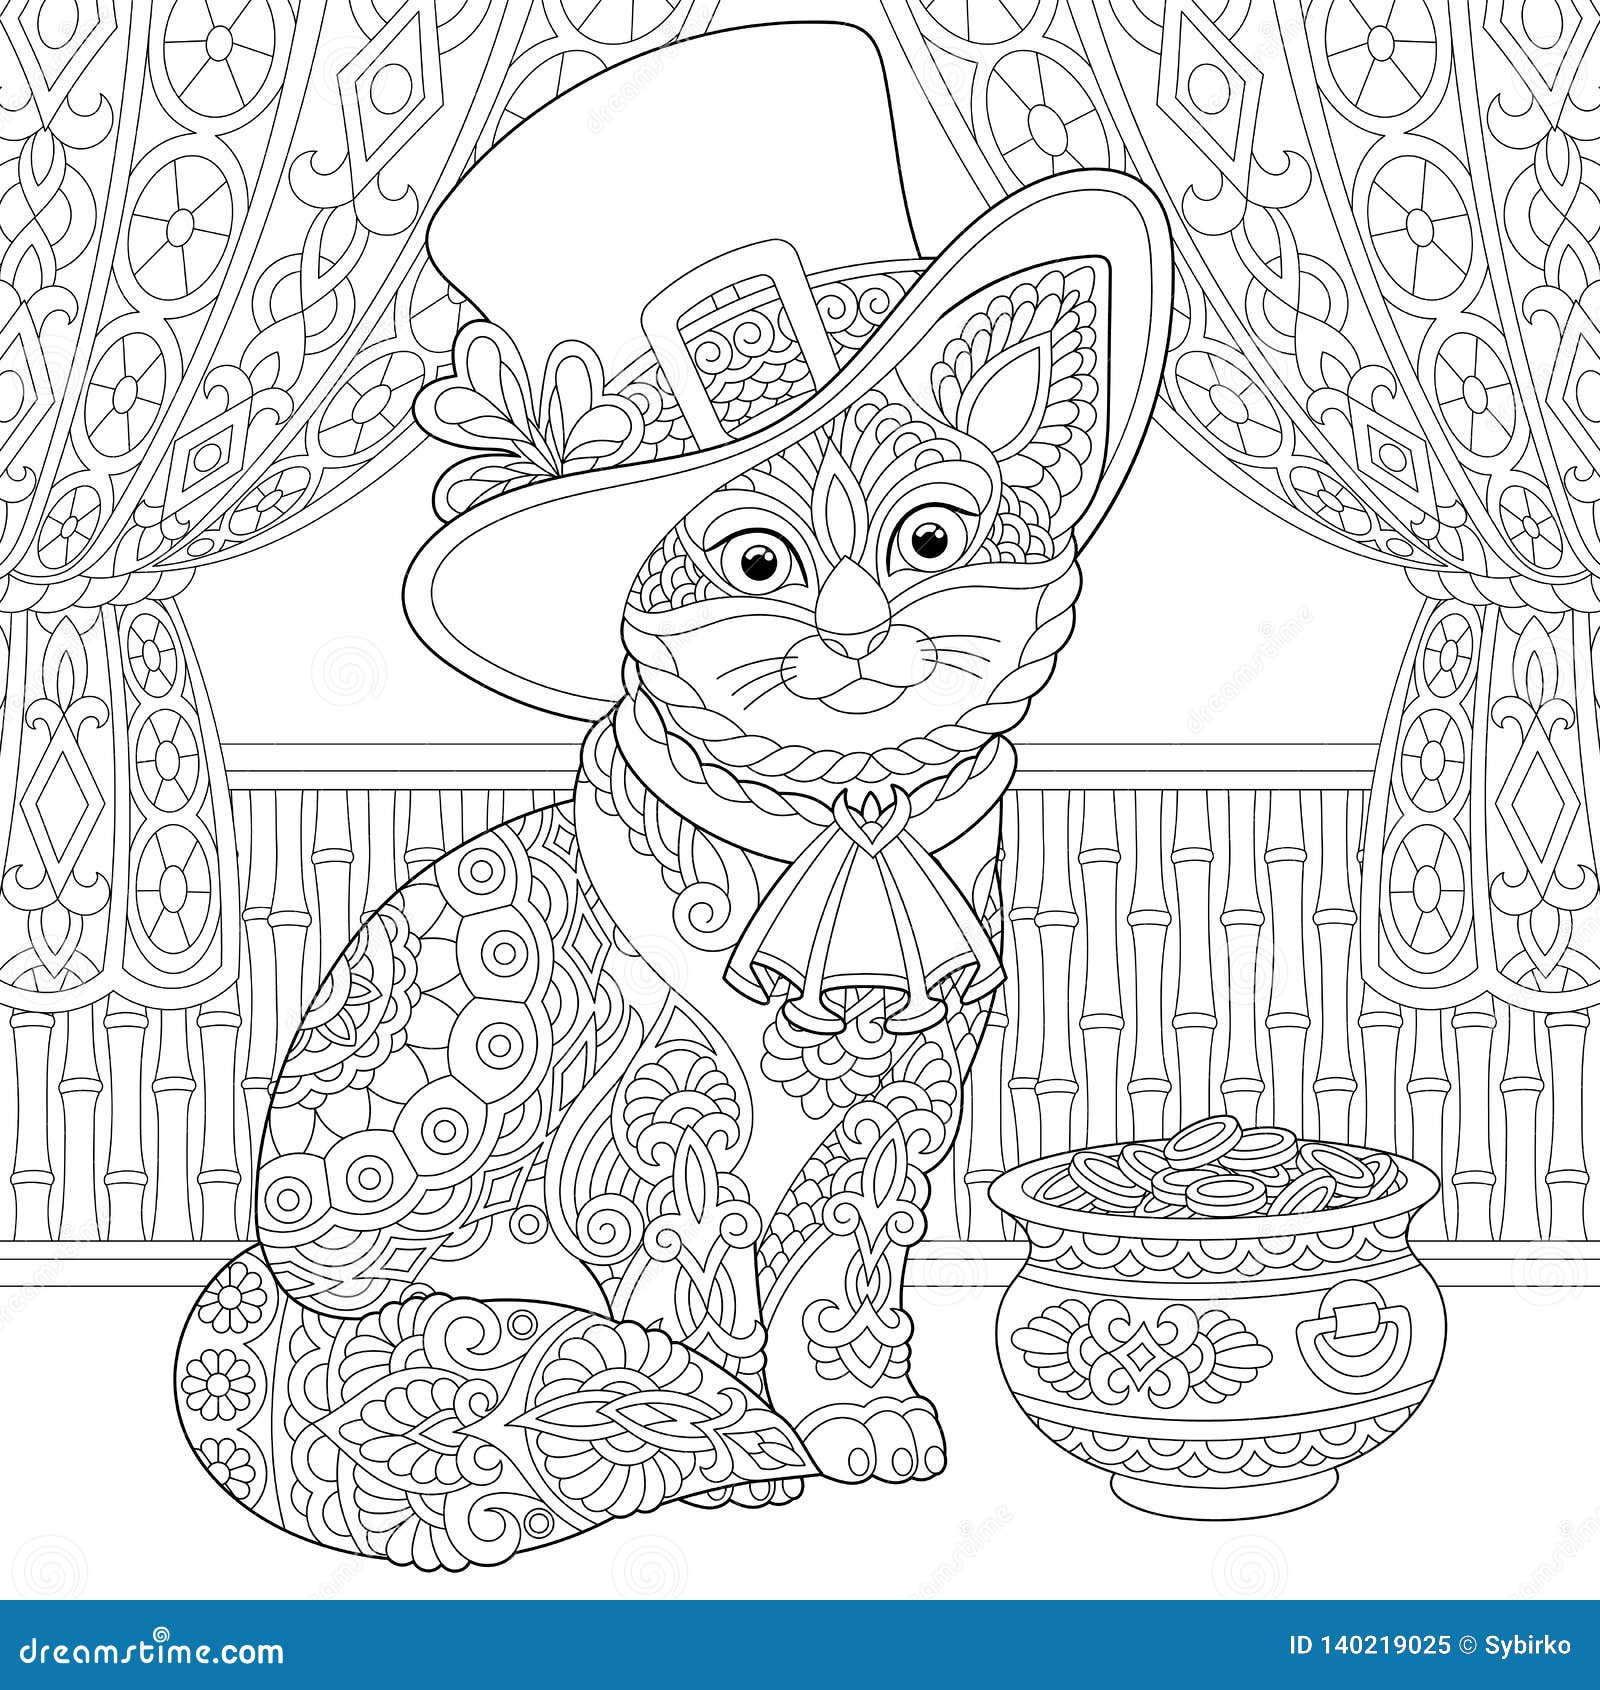 St patrick day zentangle cat coloring page stock vector